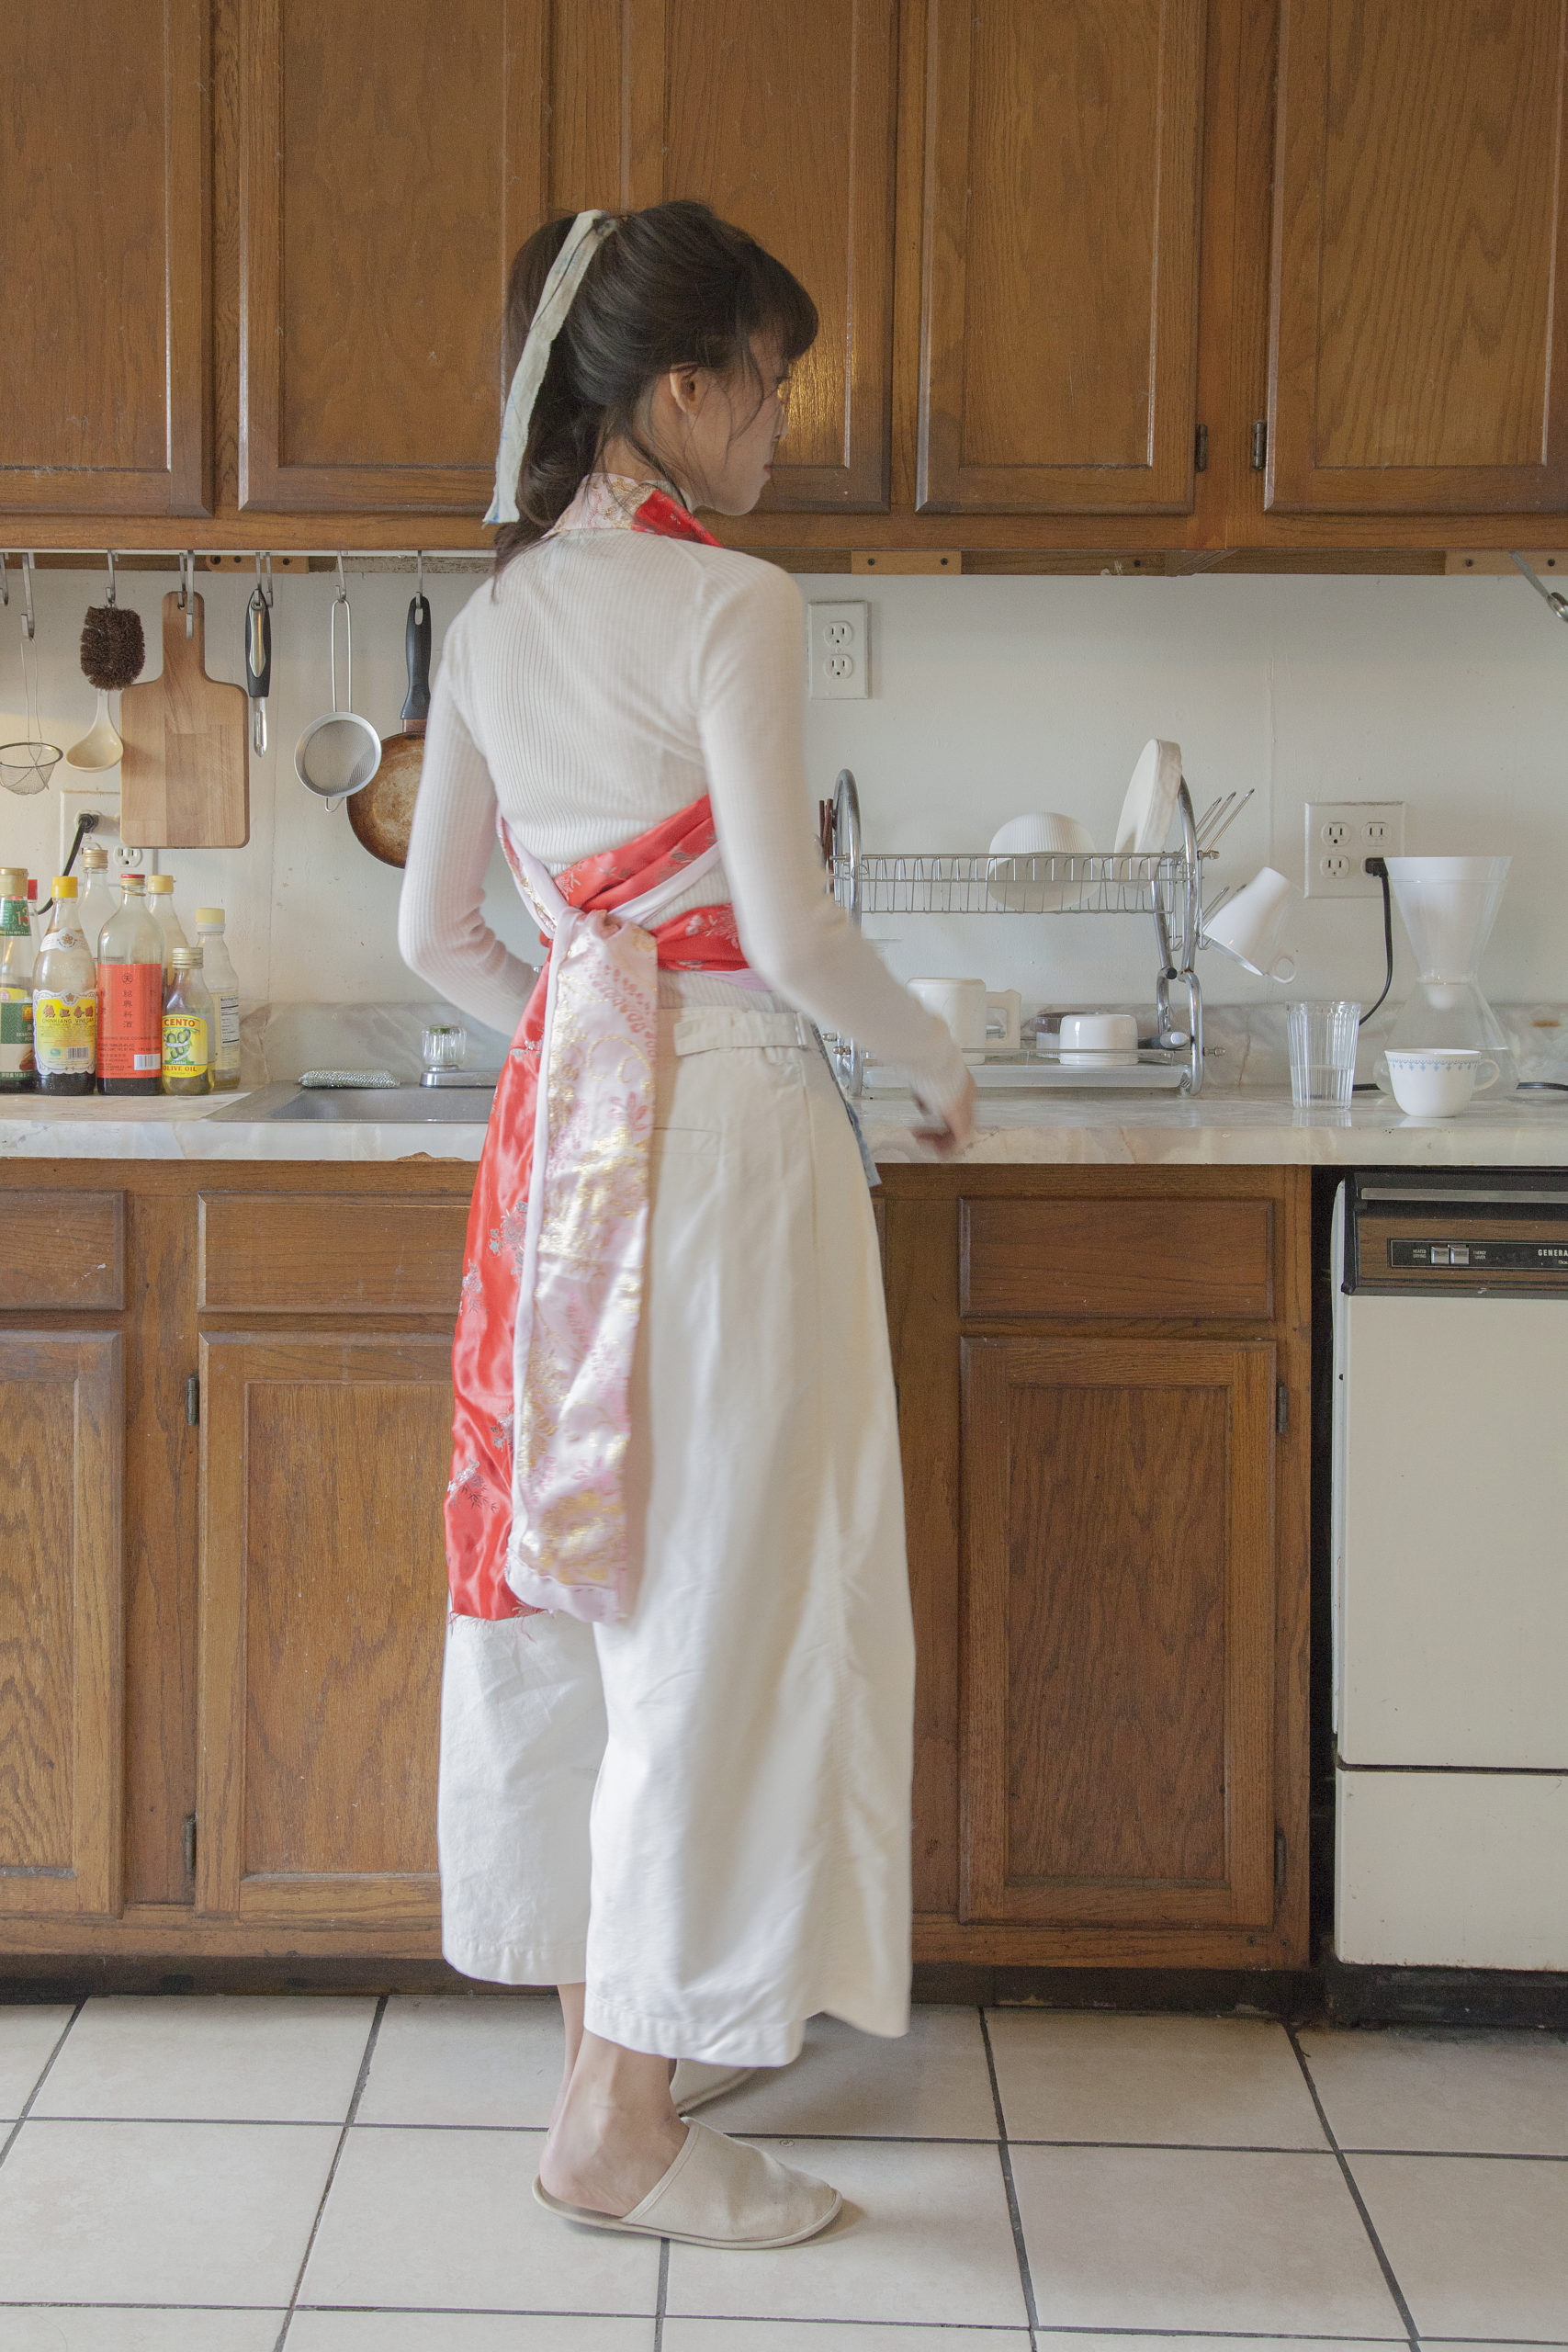 Chang Yuchen standing in a kitchen with her back to the camera, wearing a beige top and pants with a peach-colored apron that ties in the back.